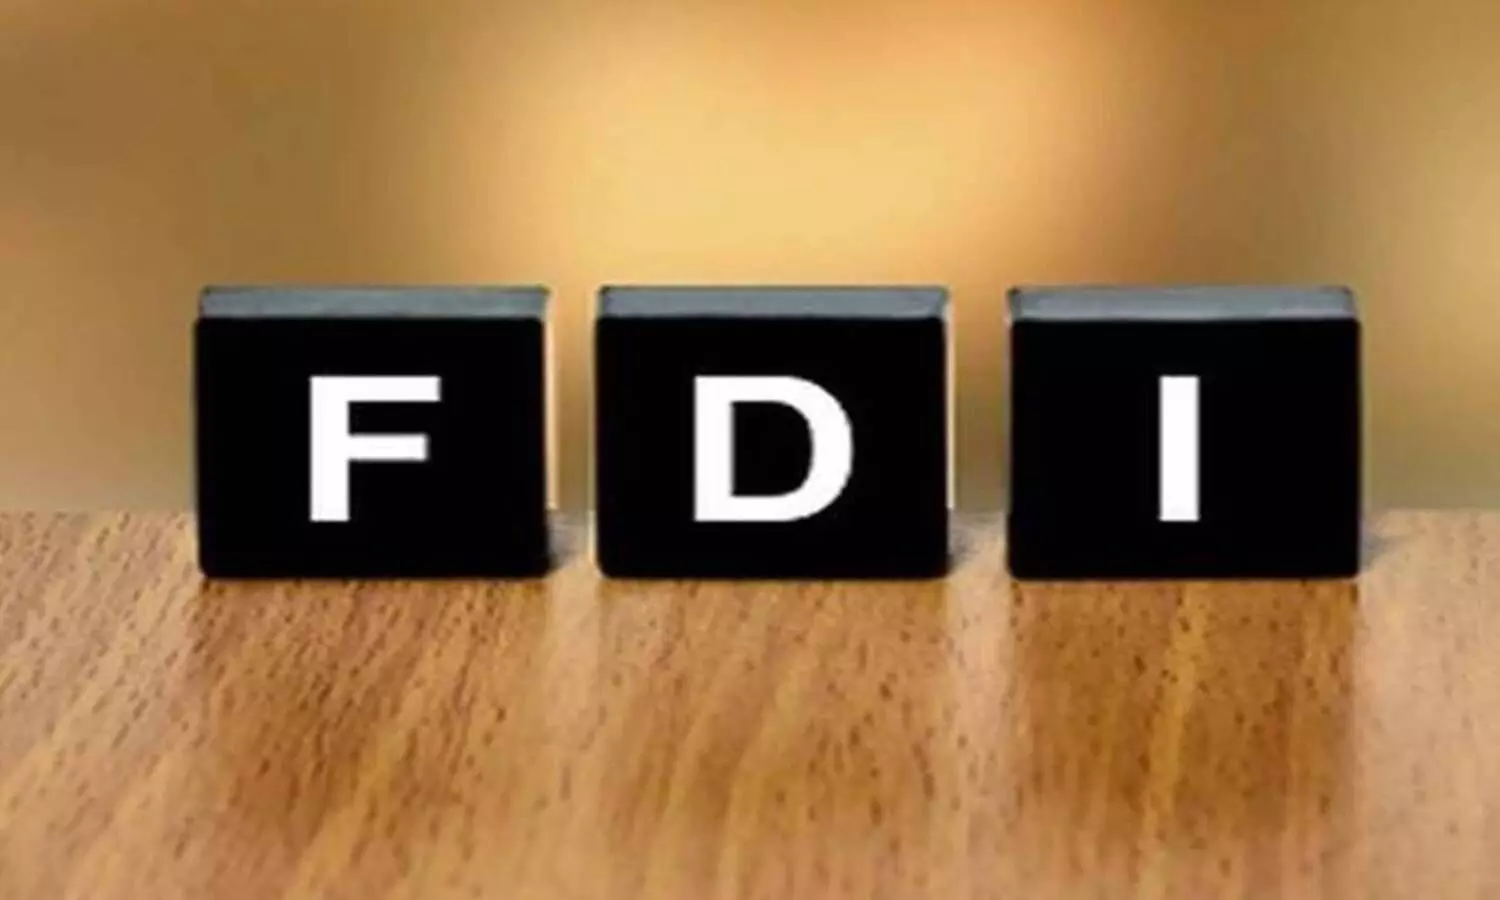 FDI equity inflows to $20.42 billion in April-July period